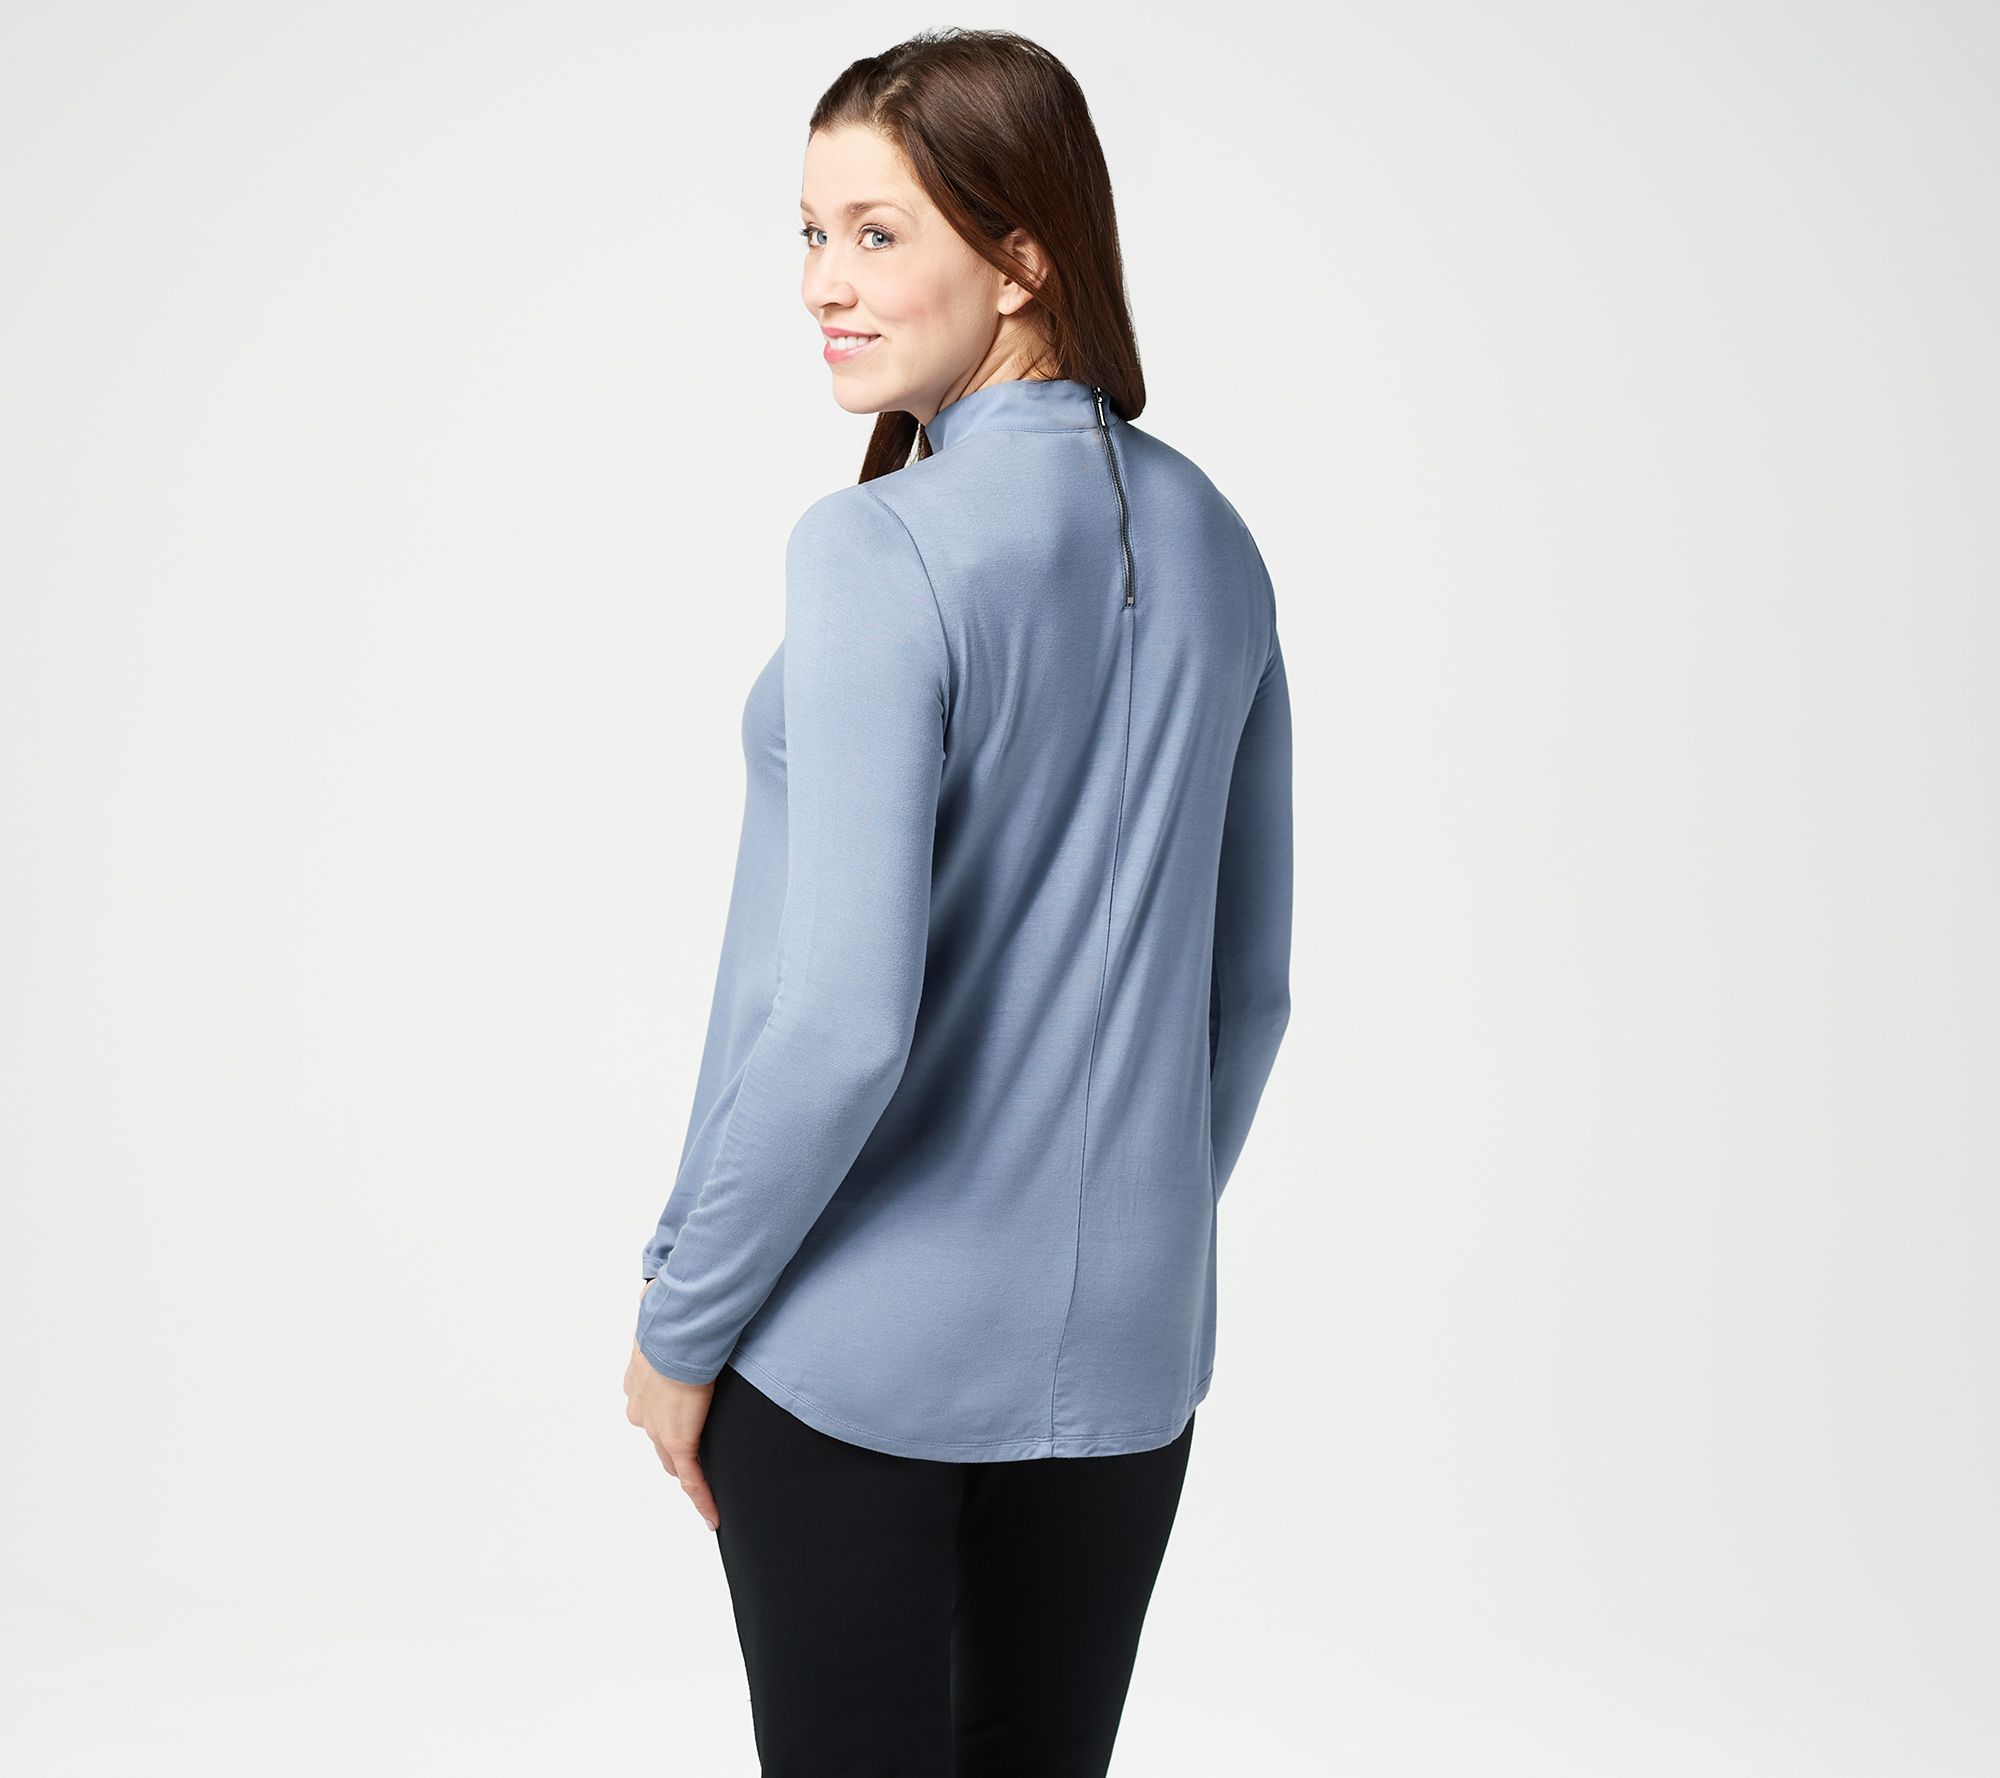 Lisa Rinna Collection Banded Neck Long Sleeve Top - QVC.com